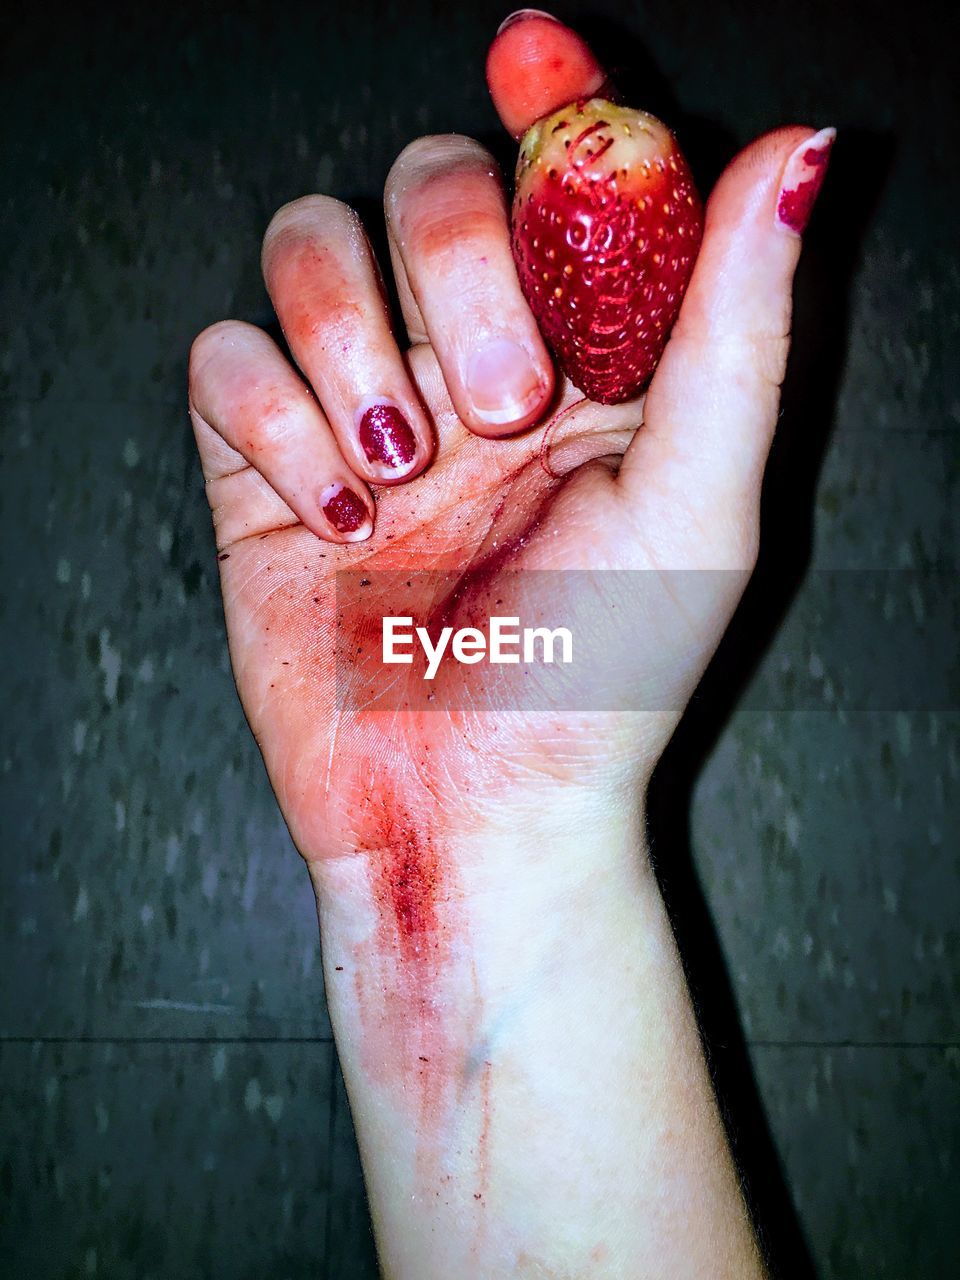 Close-up of bloody hand holding strawberry against wall